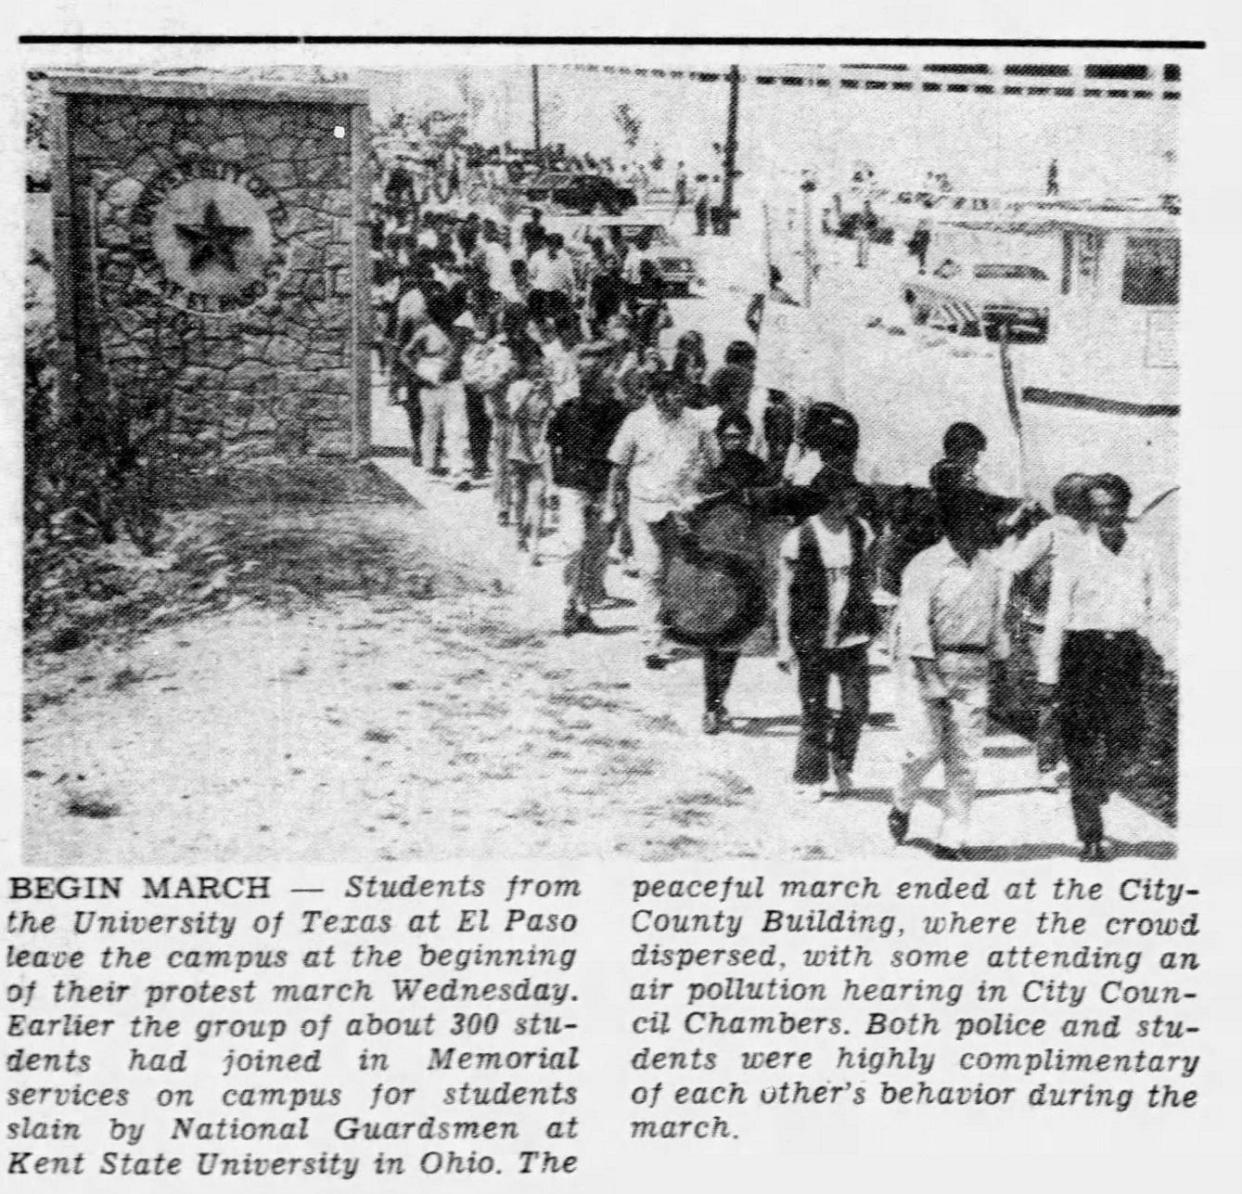 May 7, 1970: Students from the University of Texas at El Paso leave the campus at the beginning of their protest march. Earlier the group of about 300 students had joined in memorial services for students slain by National Guardsmen at Kent State University in Ohio.